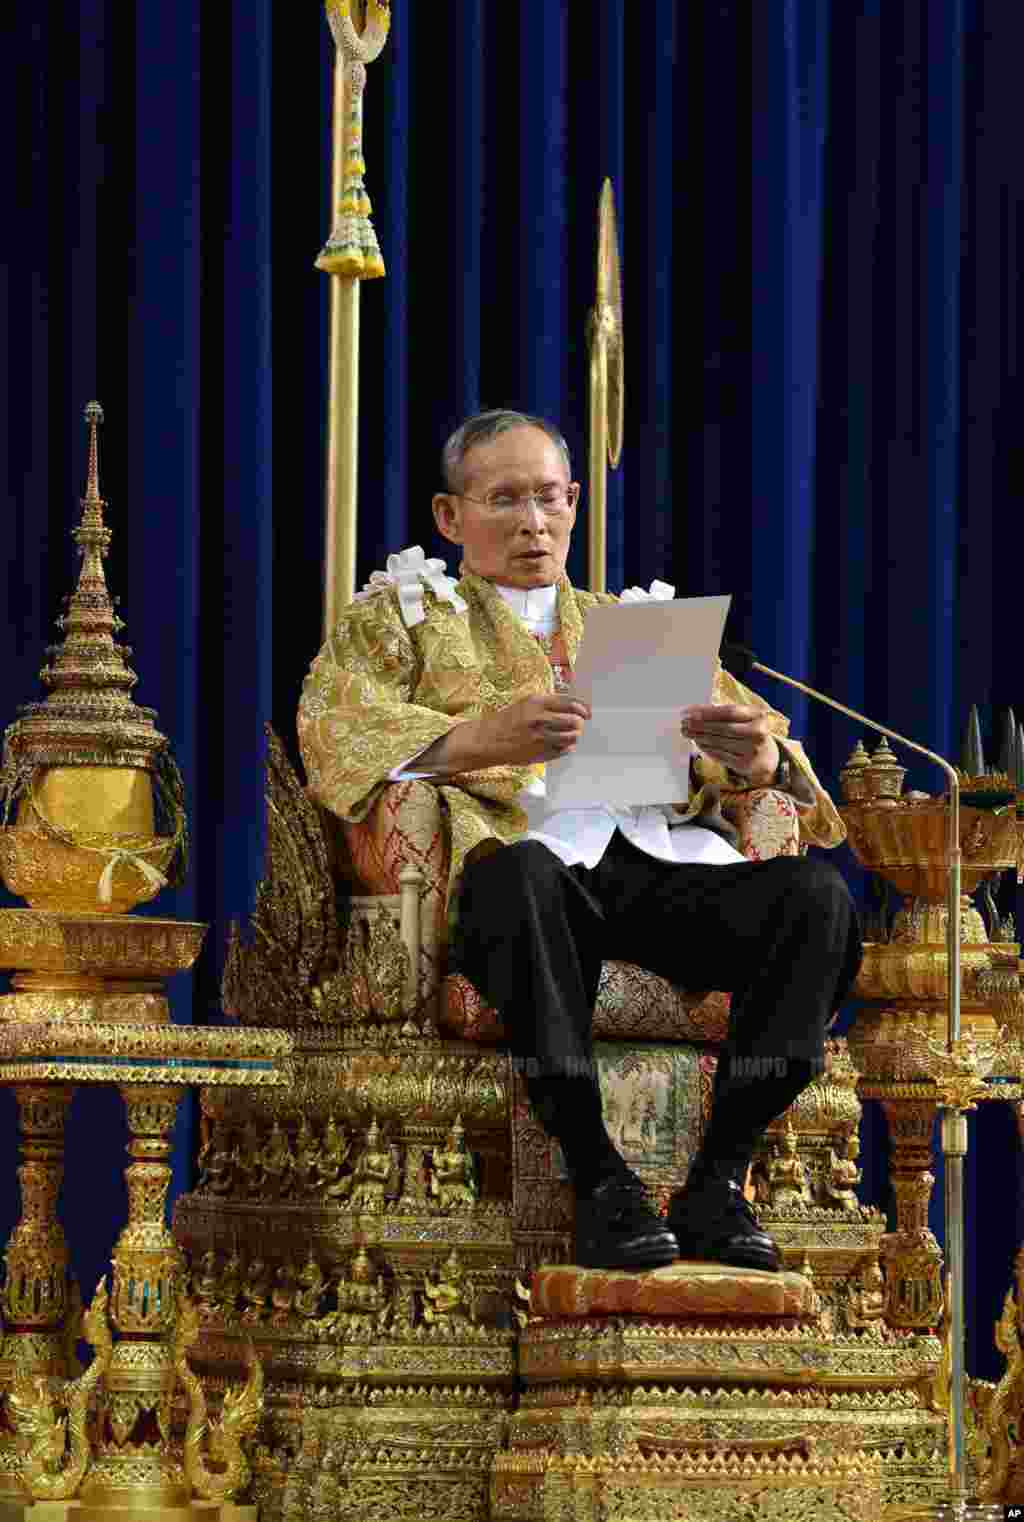 Thailand's King Bhumibol Adulyadej reads a statement at Klai Kangwon Palace during a ceremony in celebration of his 86th birthday in Prachuap Khiri Khan province, Dec. 5, 2013. (Thailand's Royal Household Bureau)